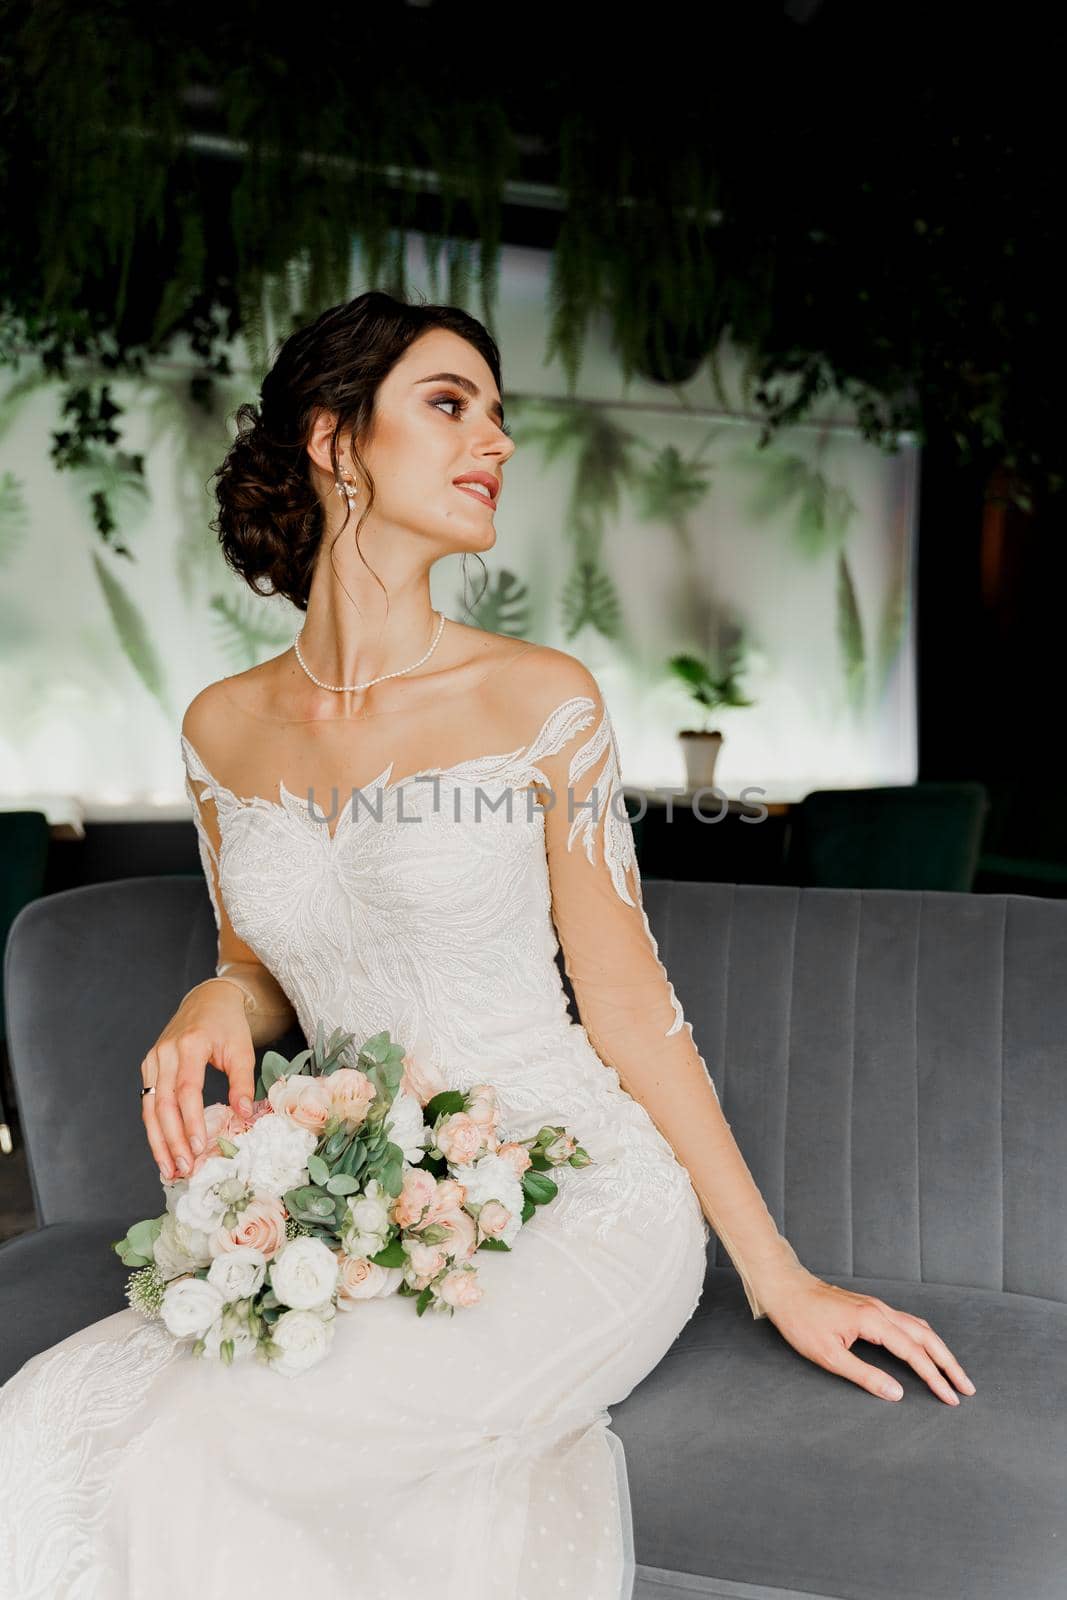 Bride in wedding dress and bridal veil seats on fashion chair in cafe. Advert for social networks for wedding agency and bridal salon.